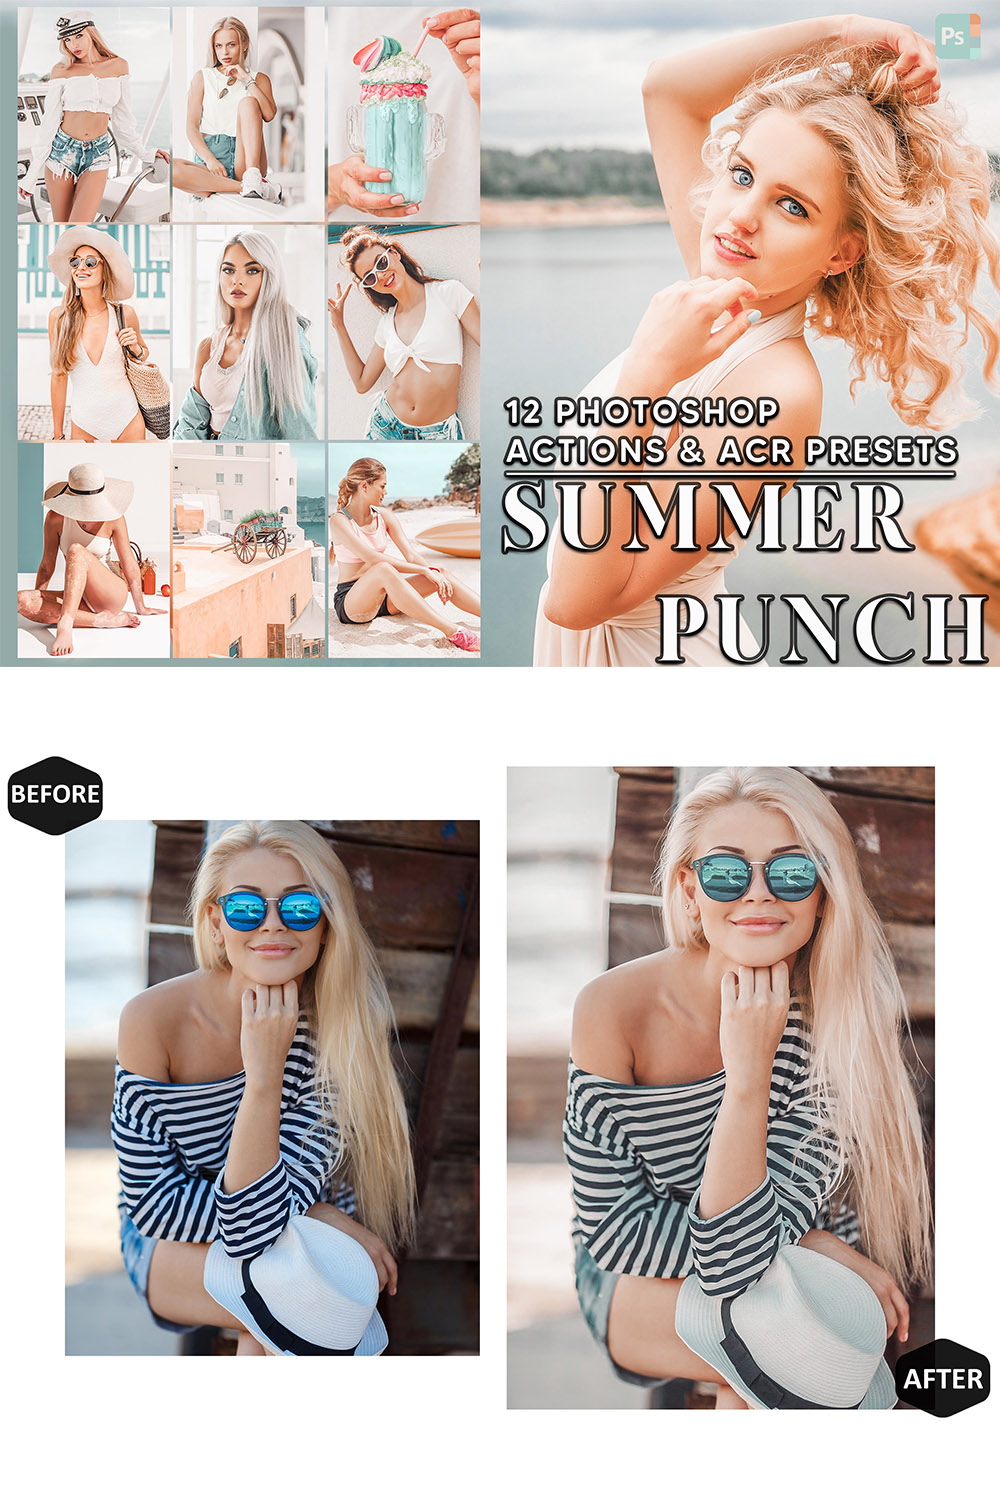 12 Photoshop Actions, Summer Punch Ps Action, Orange Skin ACR Preset, Bright Ps Filter, Atn Portrait And Lifestyle Theme For Instagram, Blogger pinterest preview image.